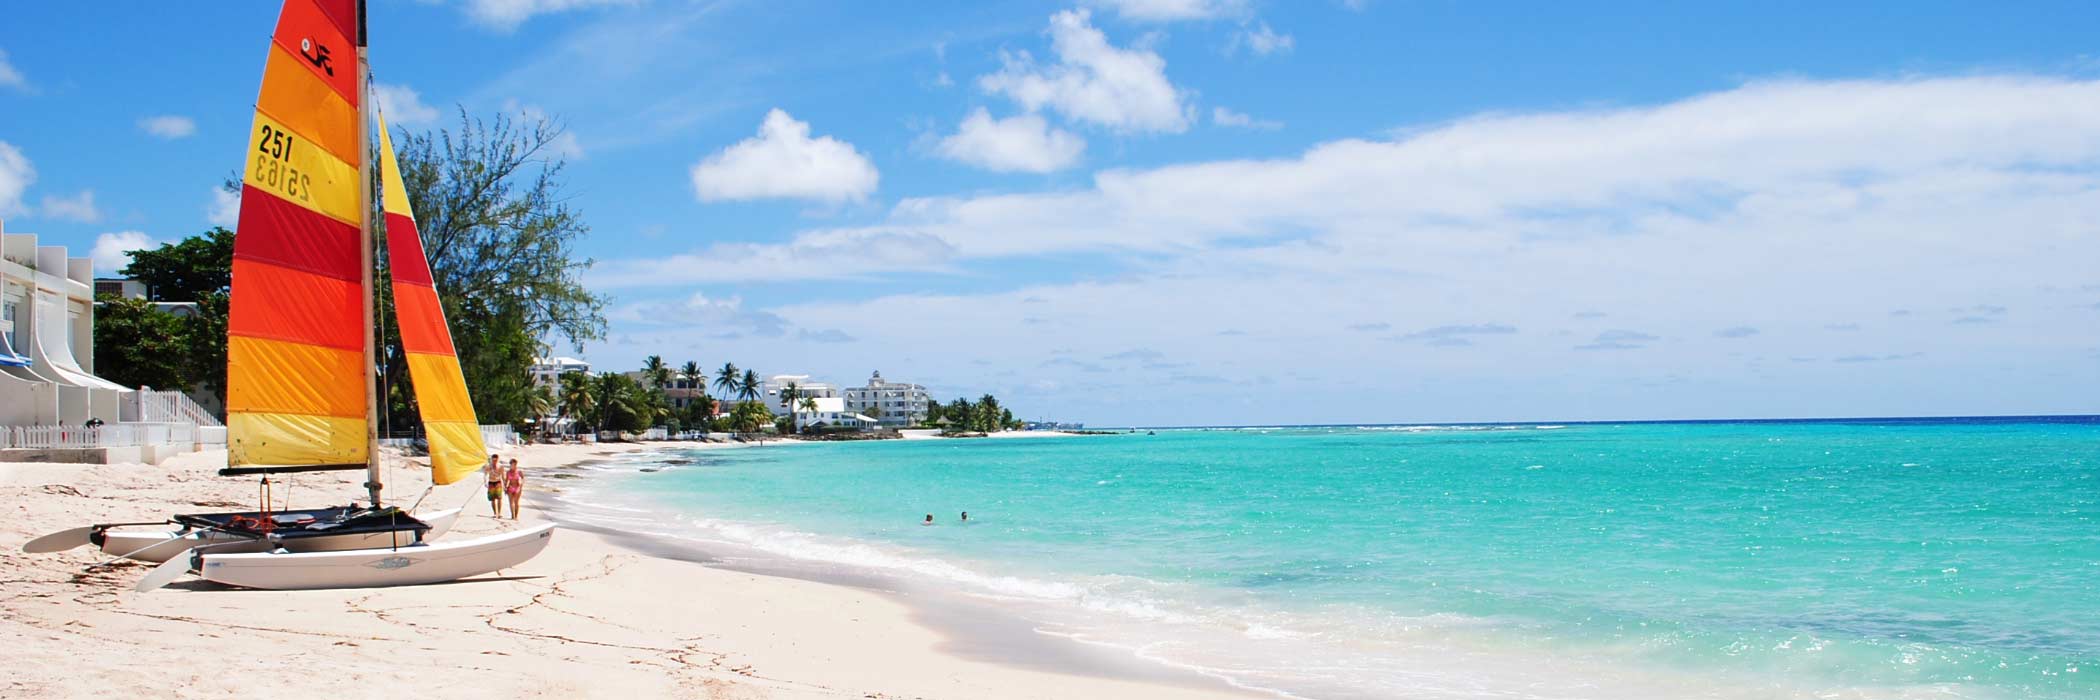 Hotels In Barbados